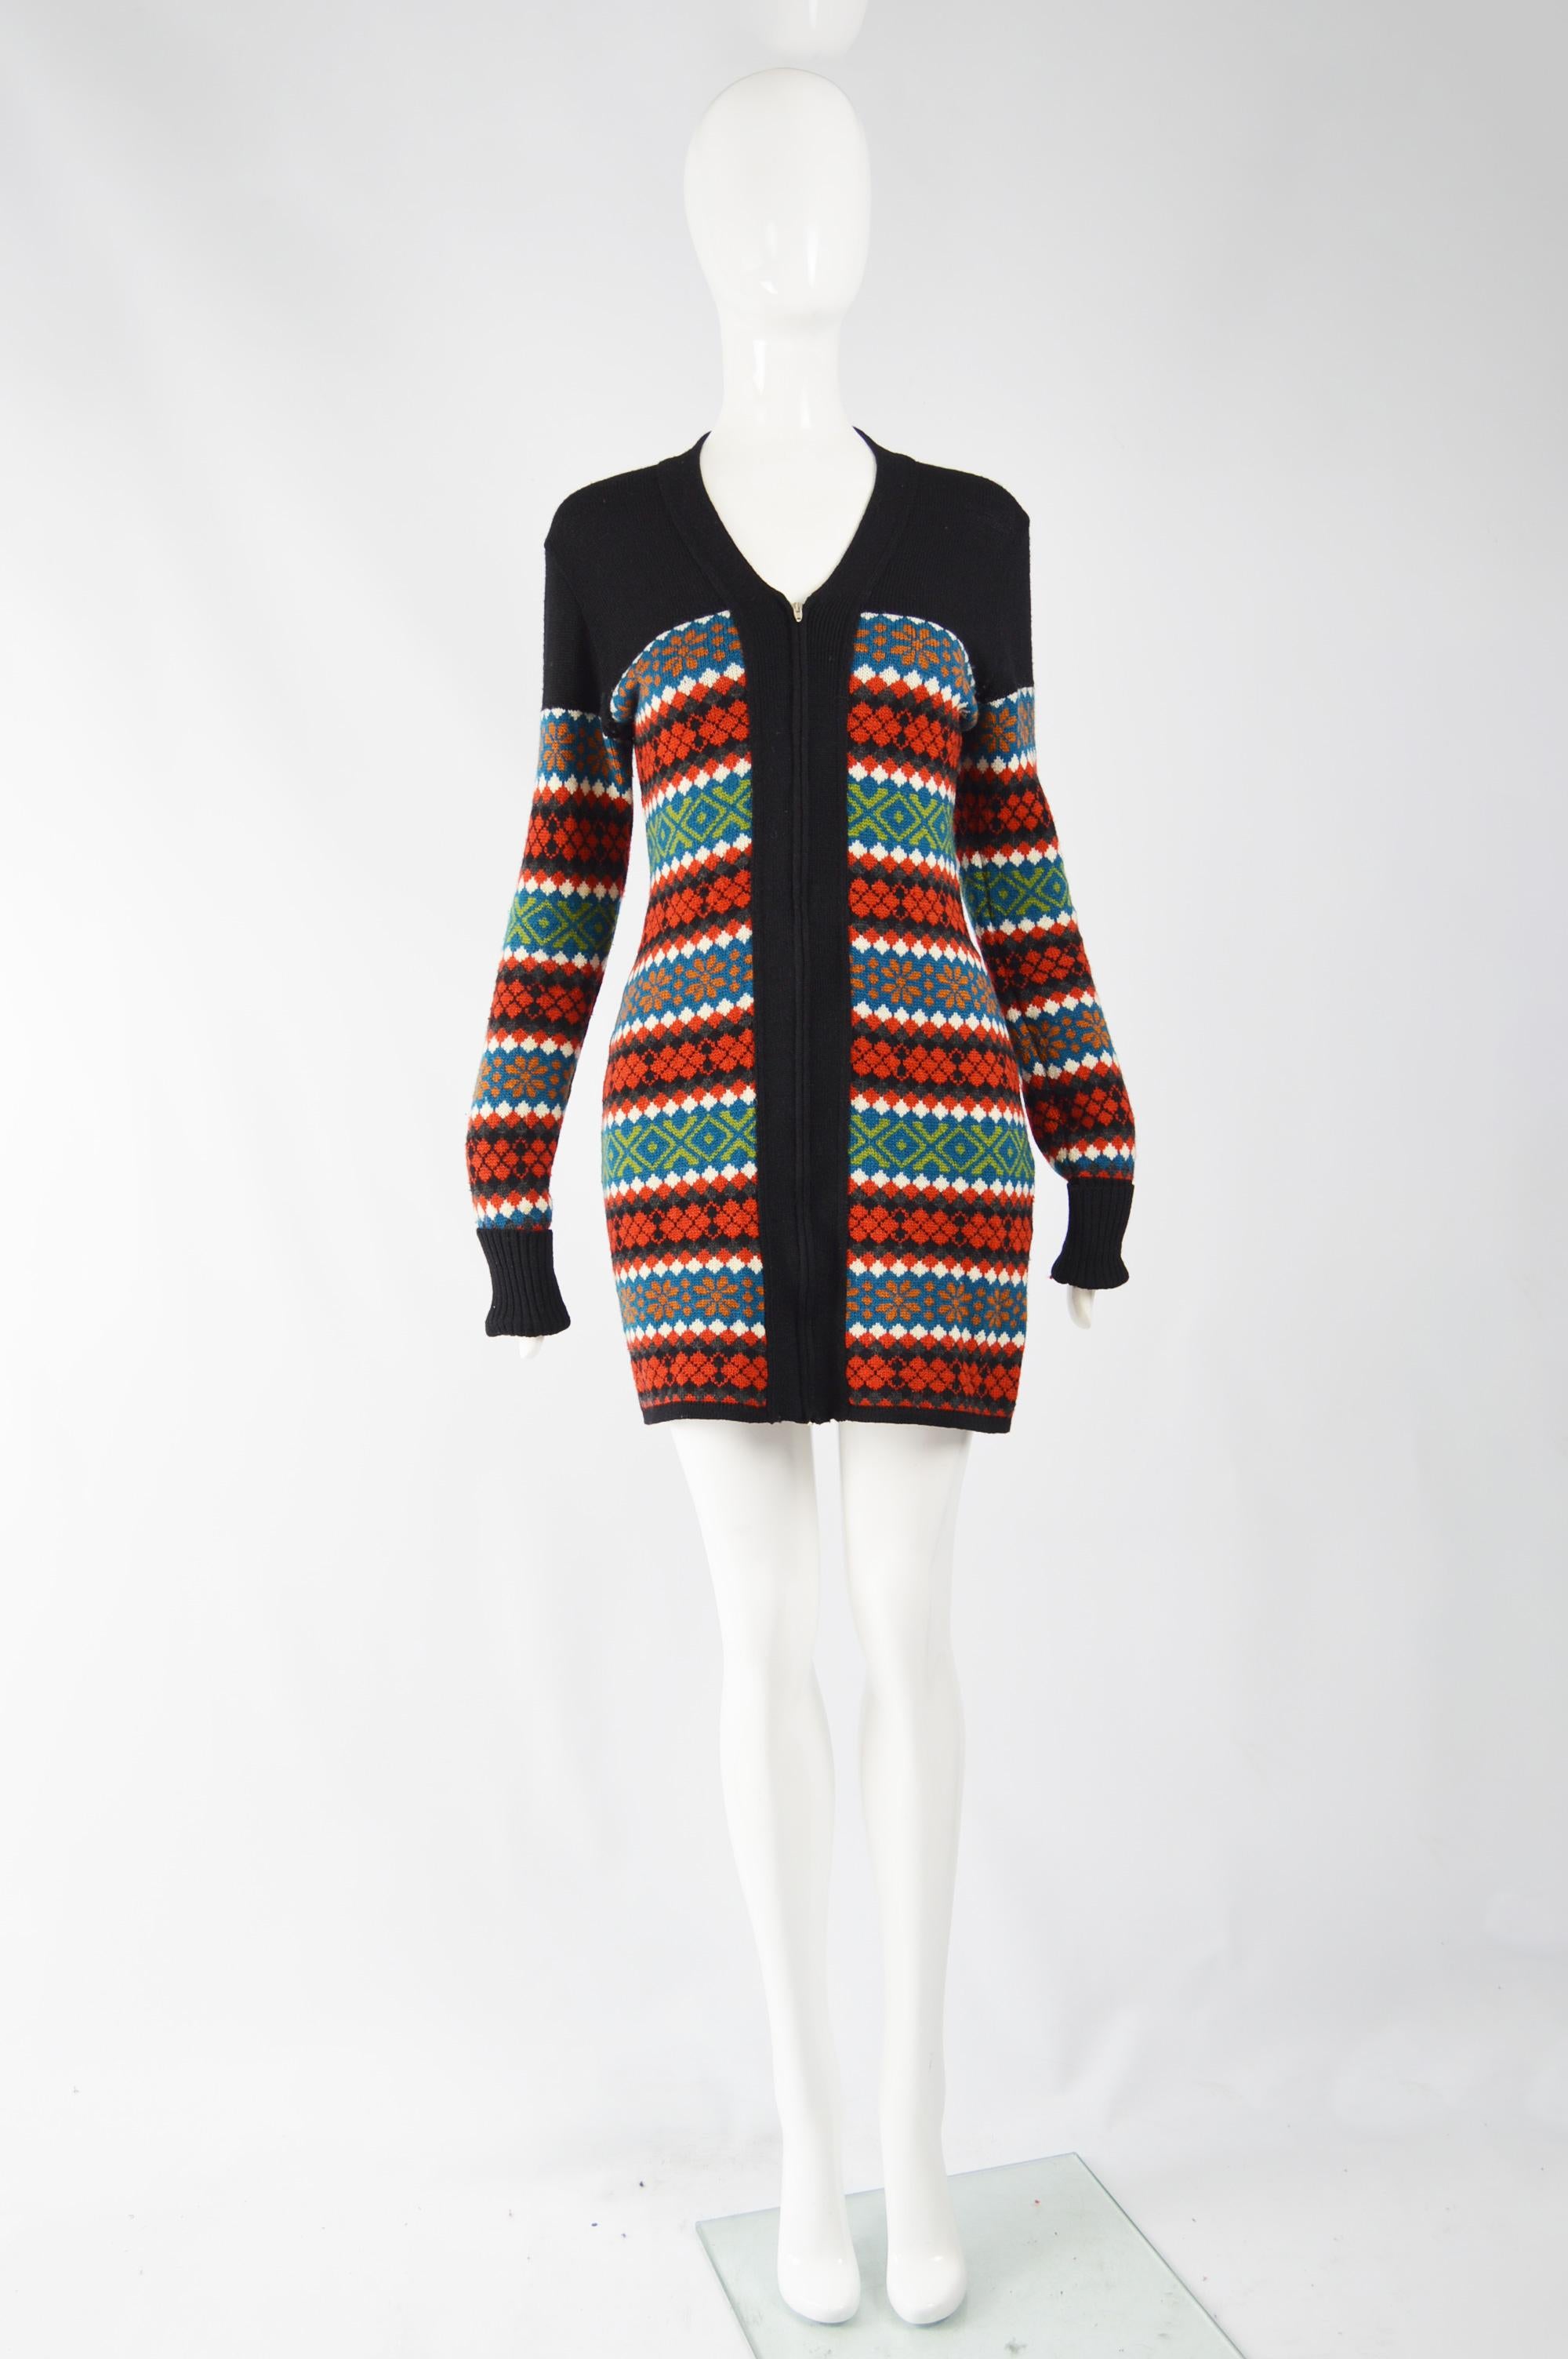 An incredible and rare vintage womens mini sweater dress from the 80s by Jean Paul Gaultier. In a red, and black wool knit with a fairisle pattern throughout, extra long sleeves and zip front.

Size: Marked IT42 which equated to a UK 10/ US 6/ EU